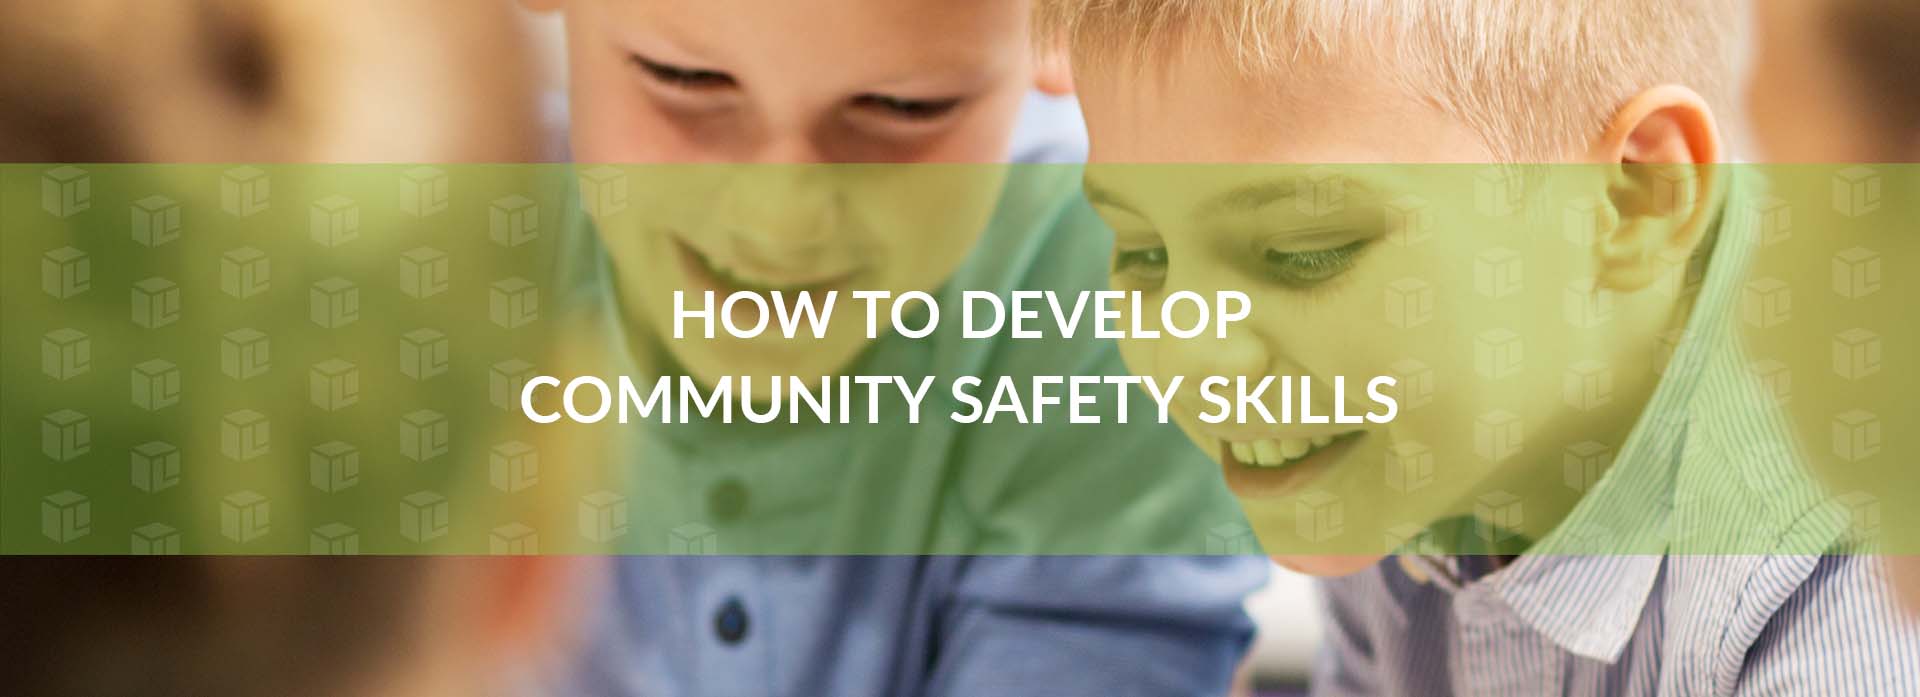 How To Develop Community Safety Skills